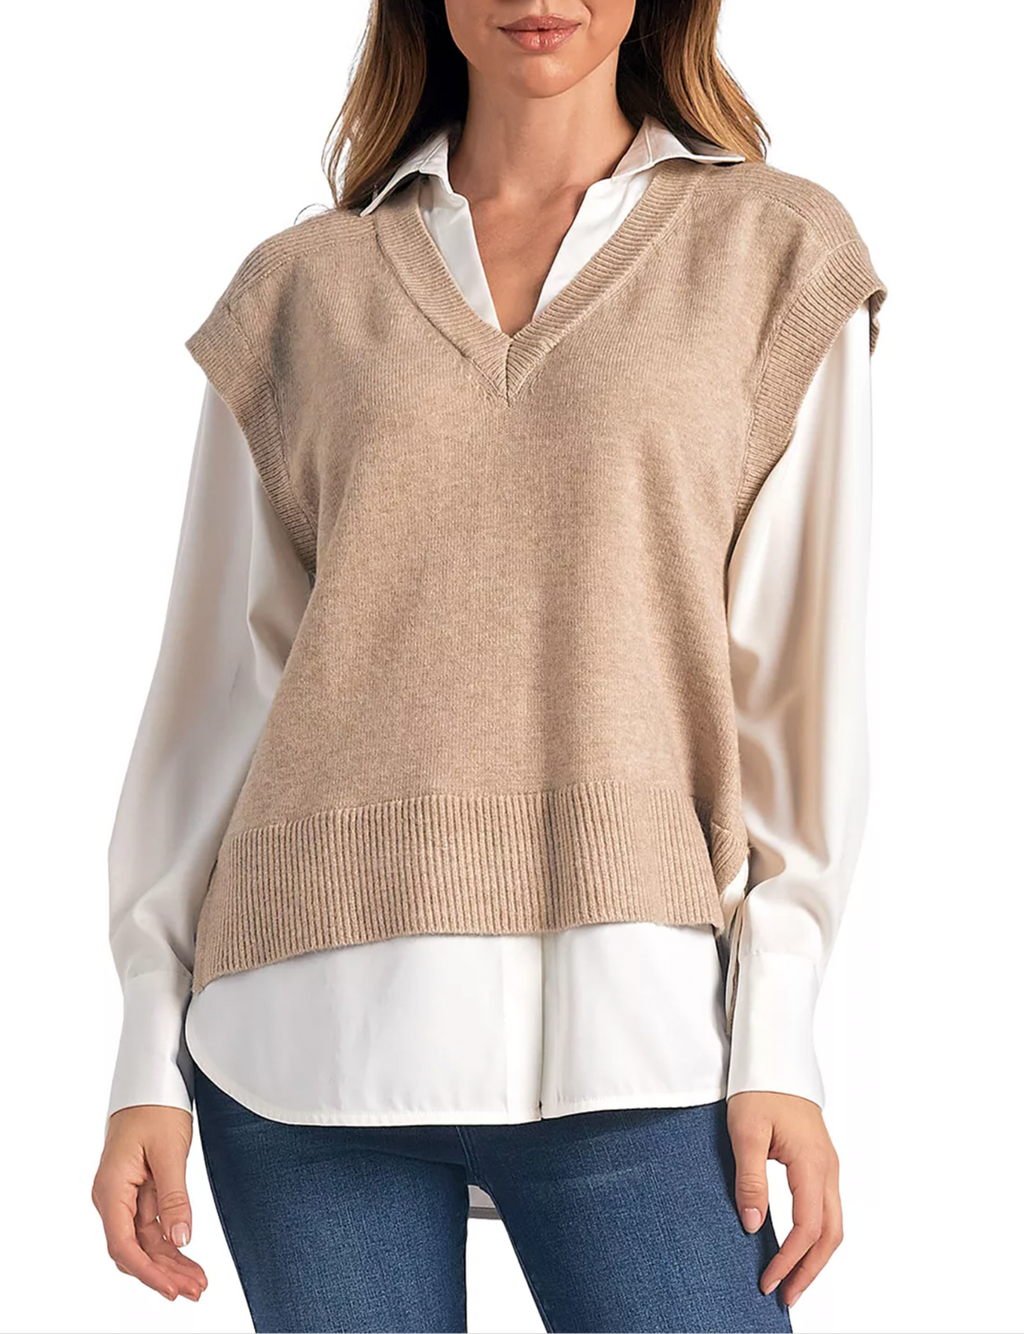 Sweater Vest Shirt Combo, Taupe/White